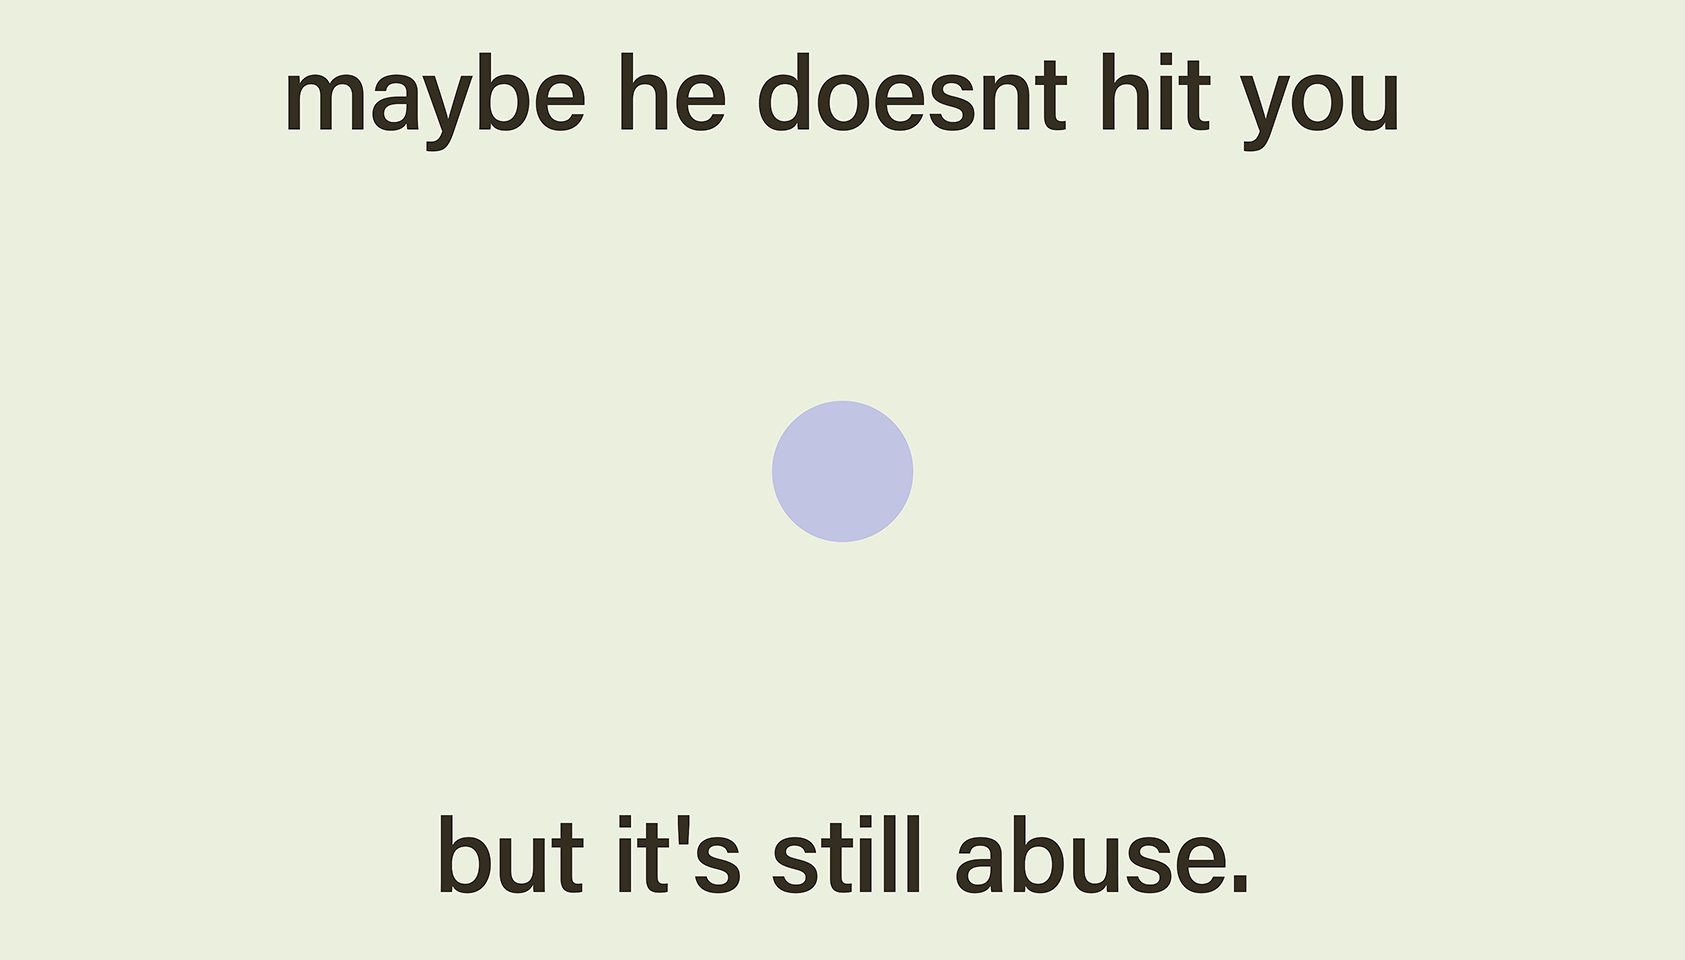 maybe he doesn't hit you, but it's still abuse